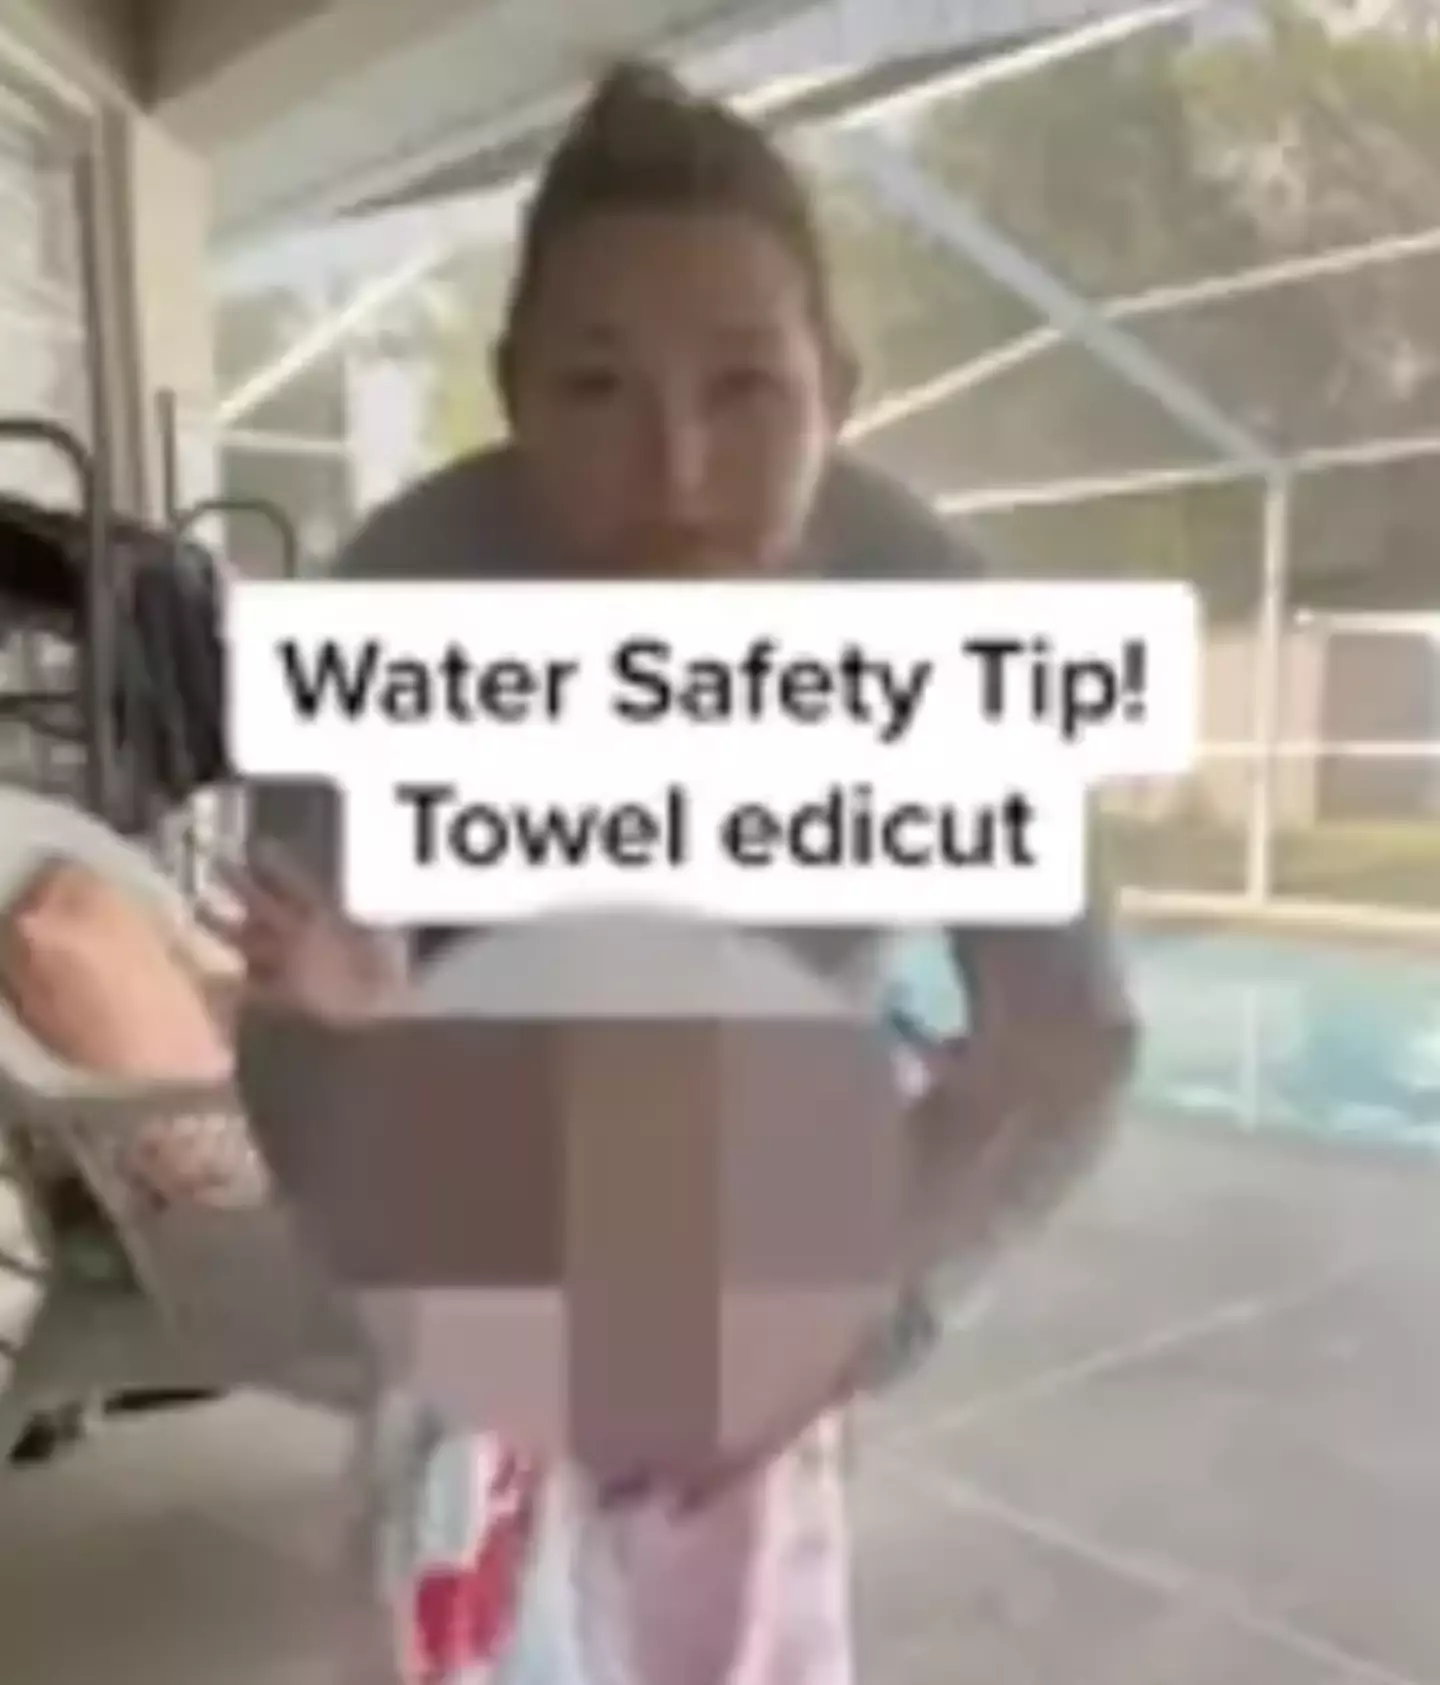 The swimming instructor shared a safer way to use a towel.